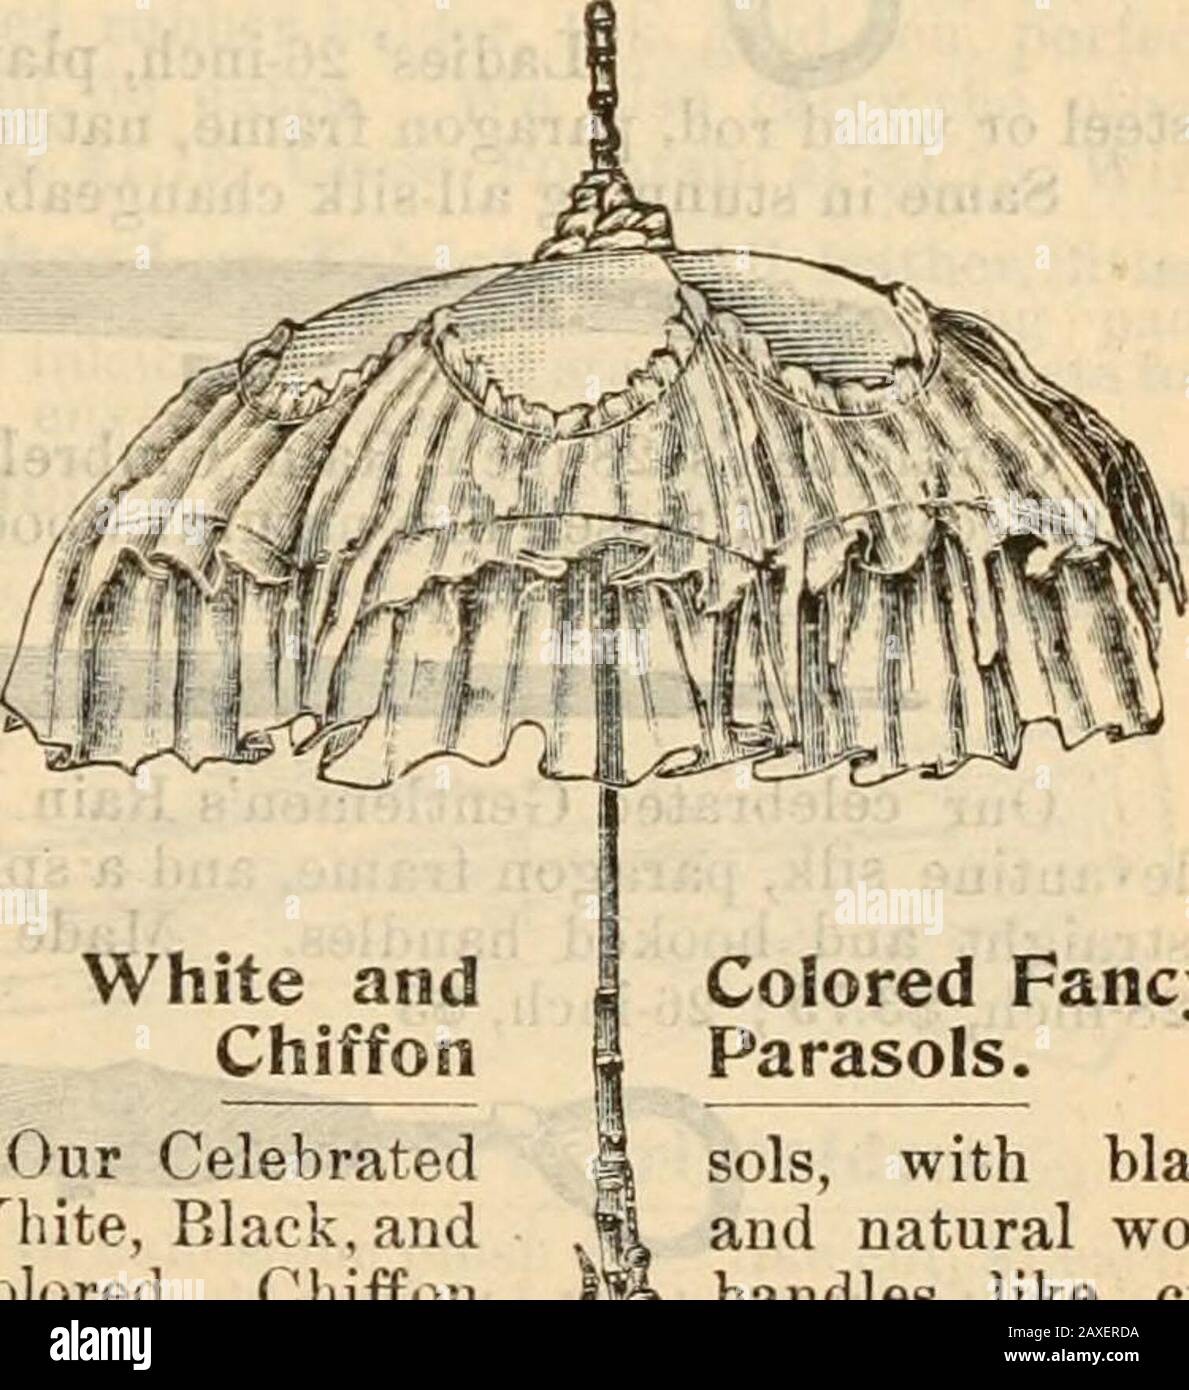 Price list. . Fancy Black J Chiffon Parasols. Fancy BlackChiffon  Parasols,of India and surahsilks, trimmed, like cut, with chiffon orlace,  black andfancy handles, $4, 5,6, 7, 8.. White andChiffon Our  CelebratedWliite, P&gt;lack,andColored